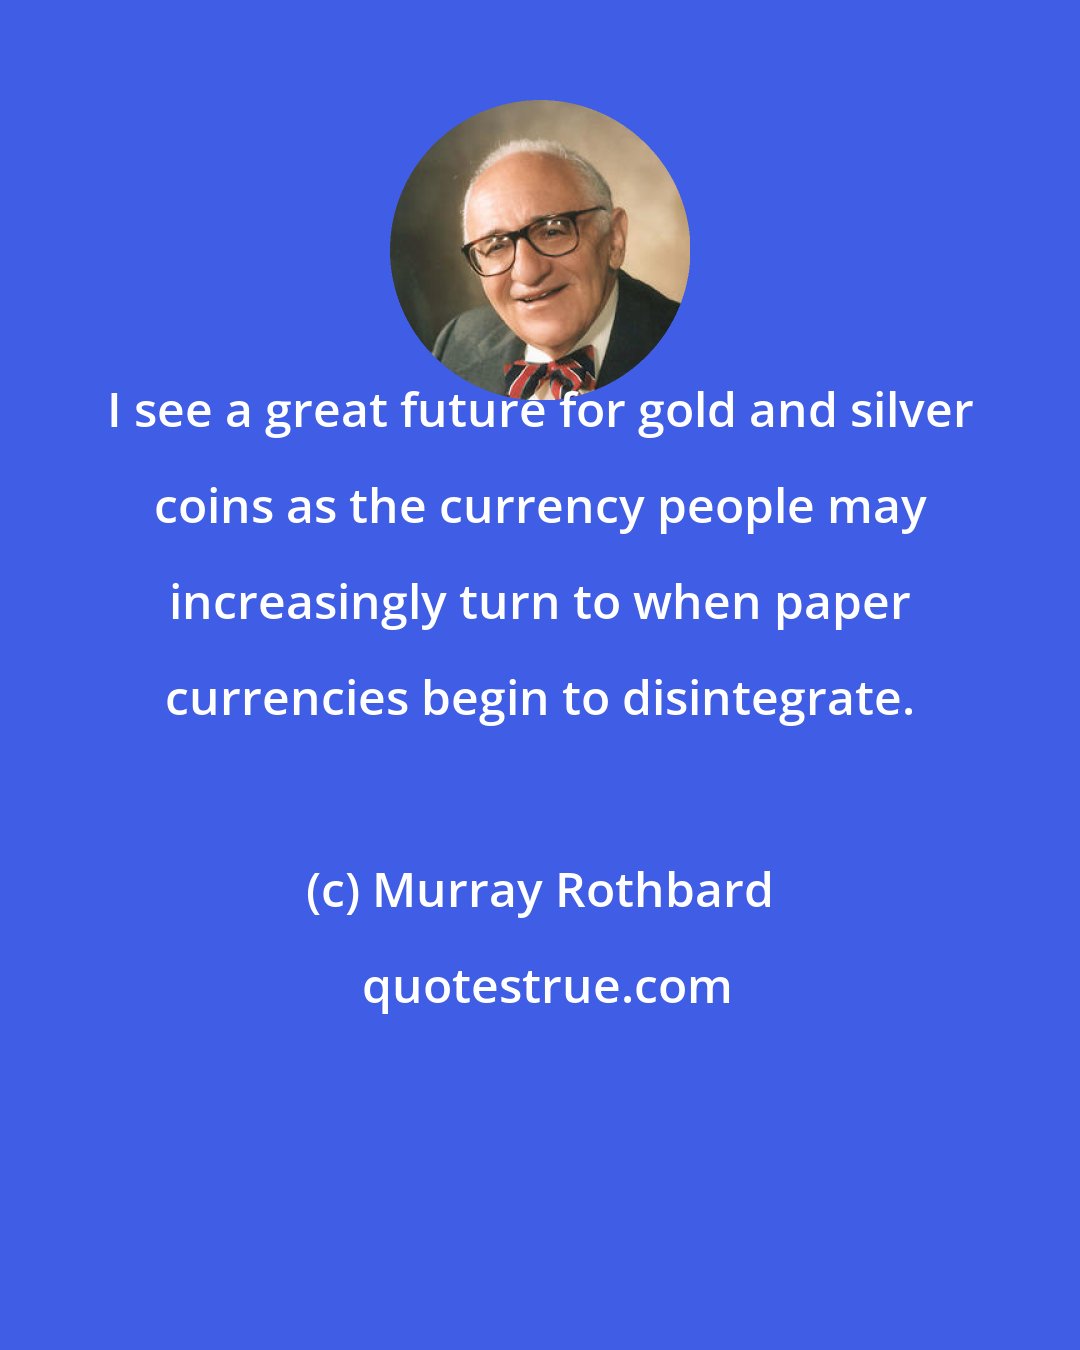 Murray Rothbard: I see a great future for gold and silver coins as the currency people may increasingly turn to when paper currencies begin to disintegrate.